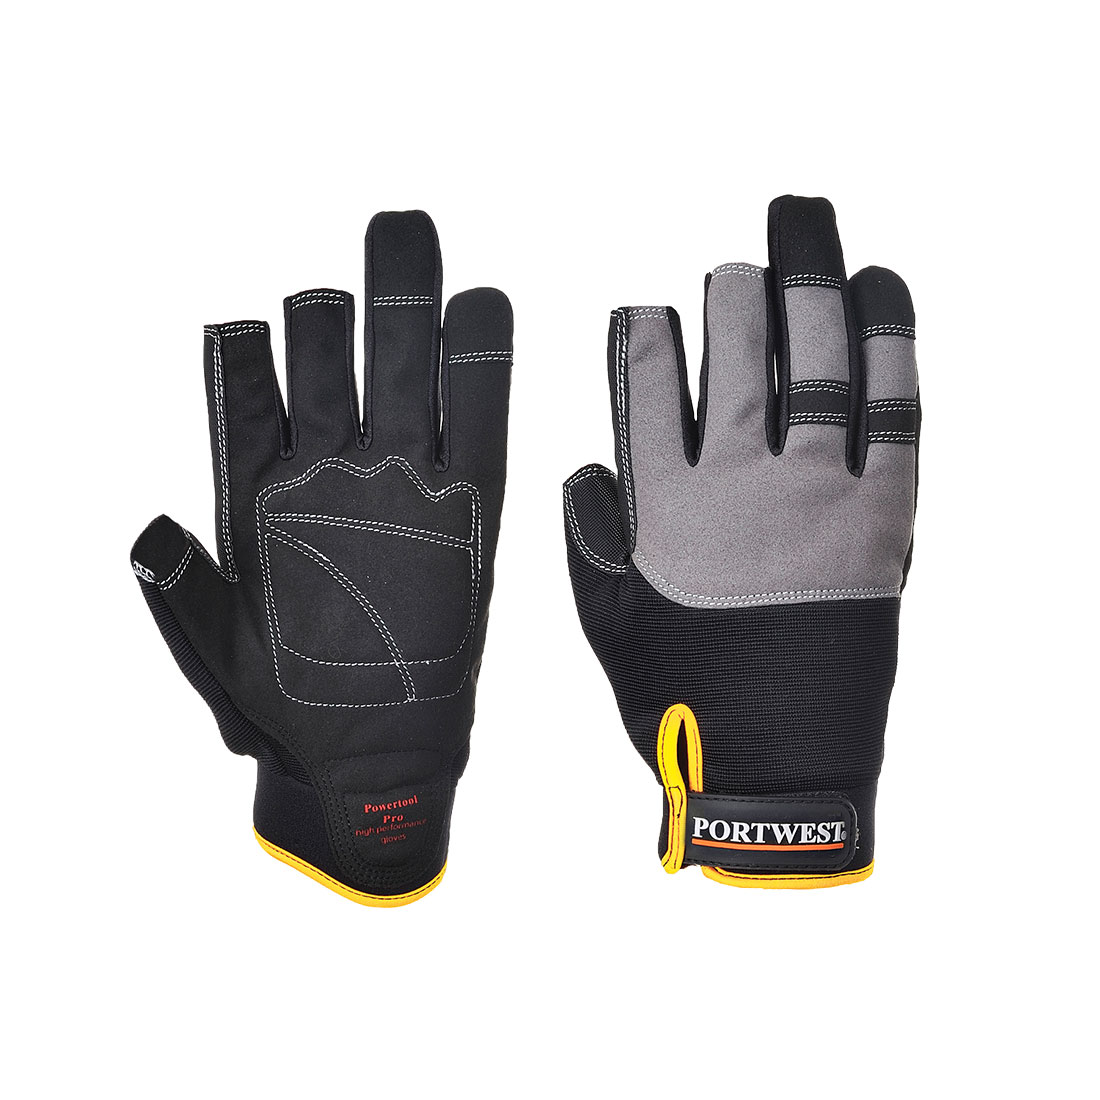 A740 Portwest® Pro High Performance Gloves